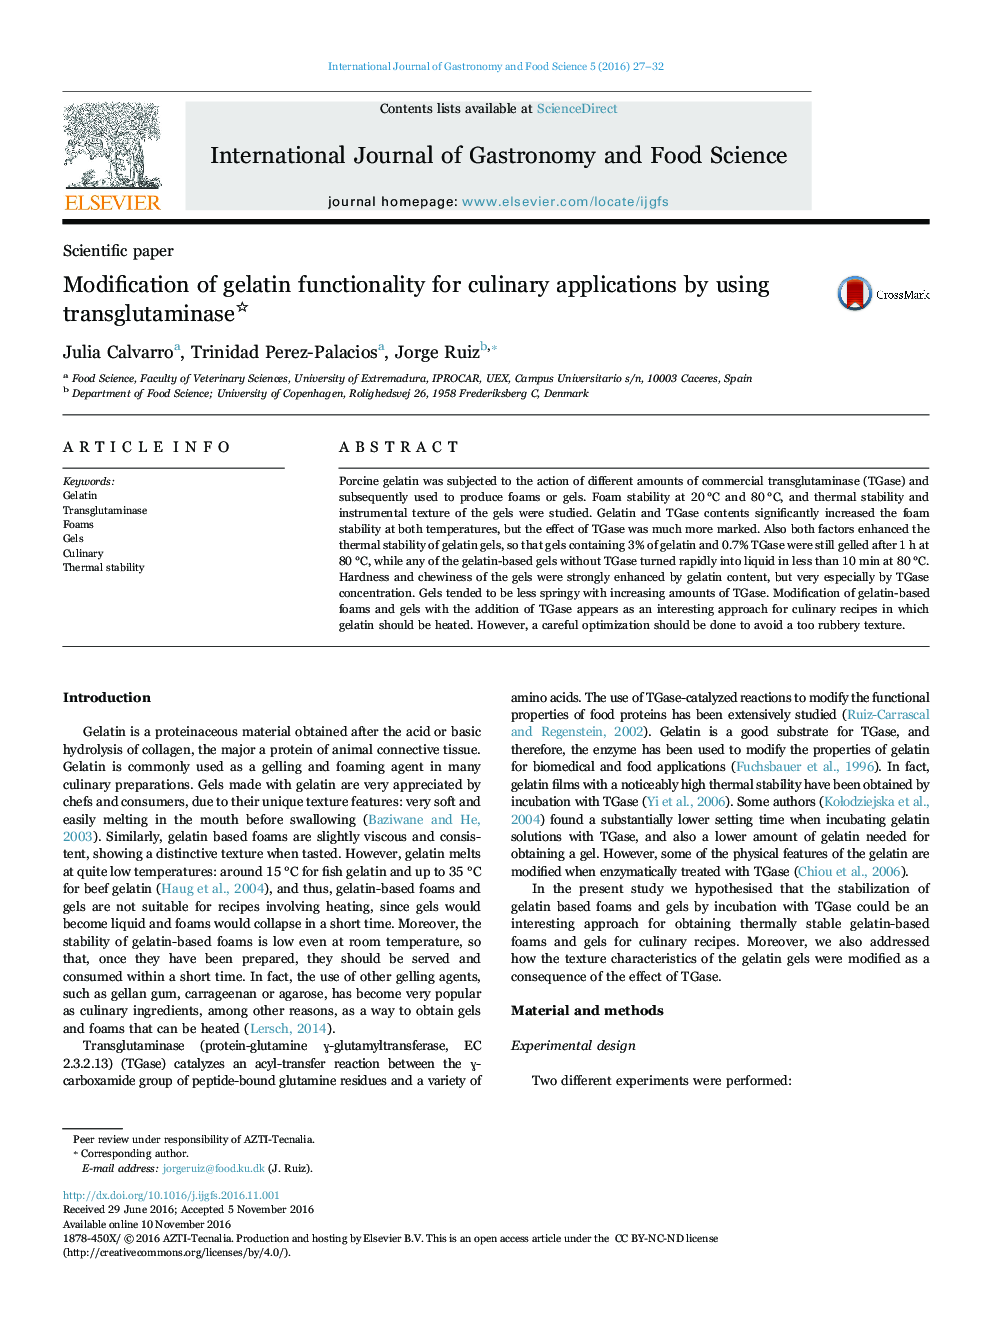 Modification of gelatin functionality for culinary applications by using transglutaminase